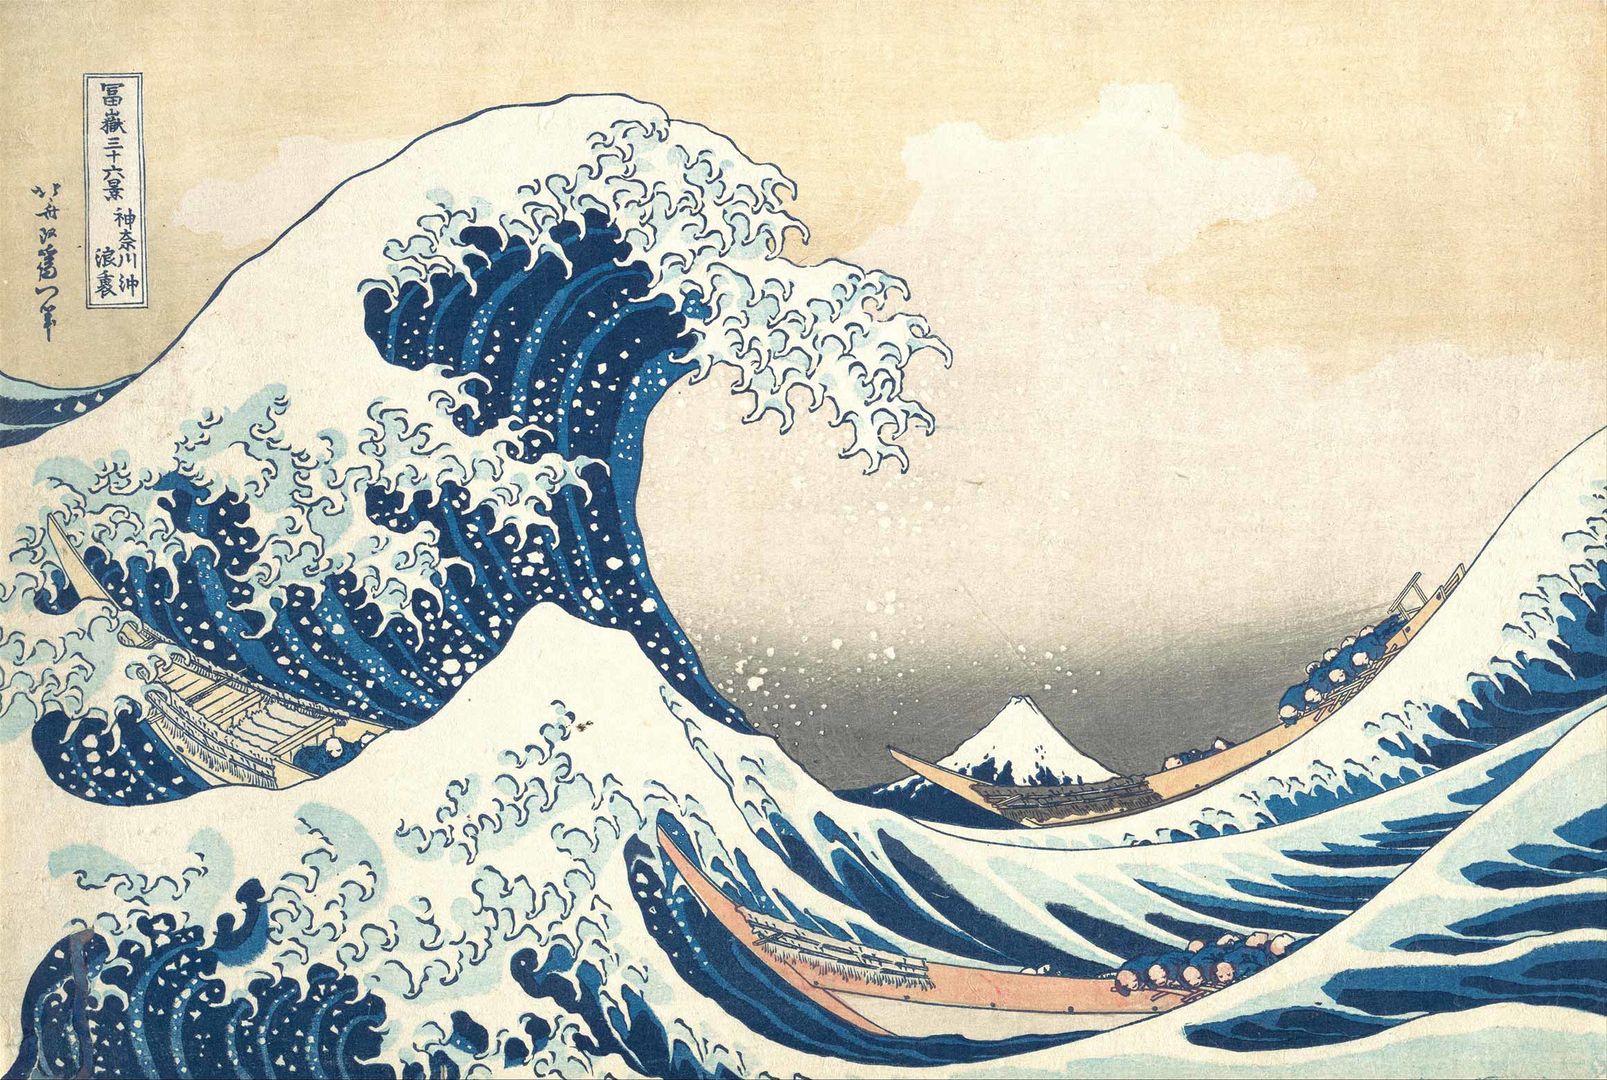 A huge blue wave with white crests towering over three small boats caught on the sea, with Mount Fuji looking very small in the distance